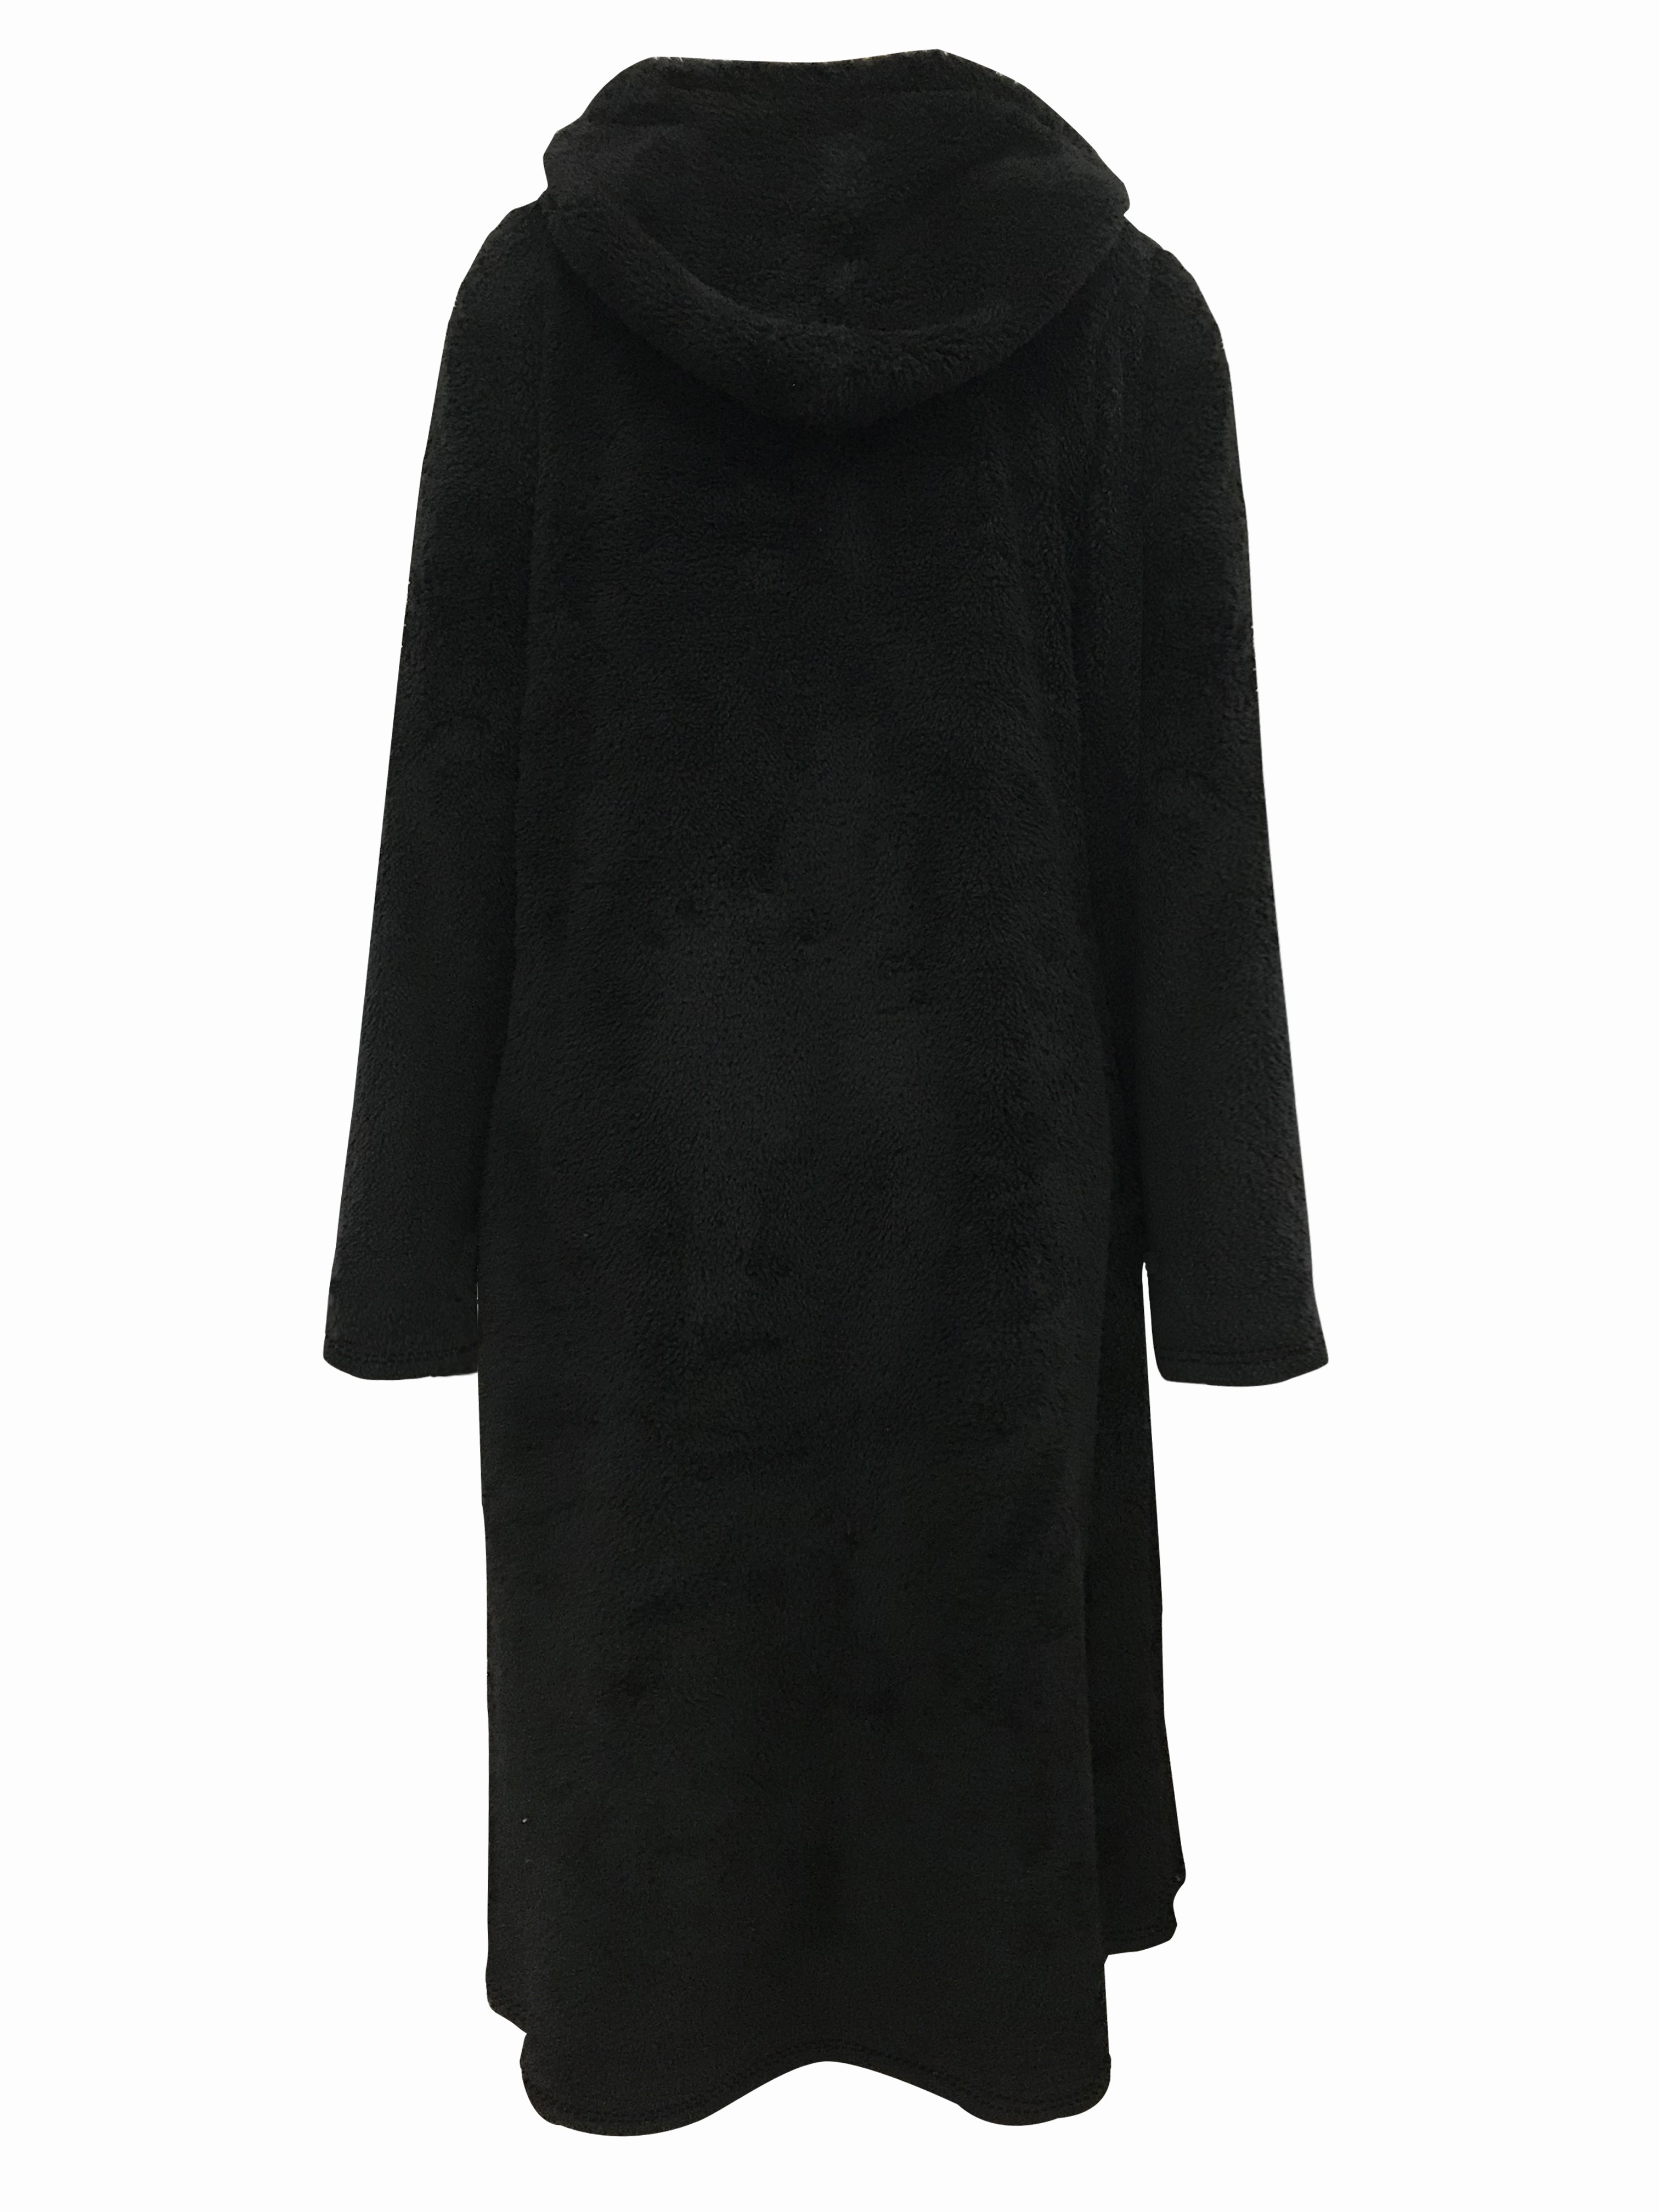 teddy hooded dress casual long sleeve winter warm dress womens clothing details 7